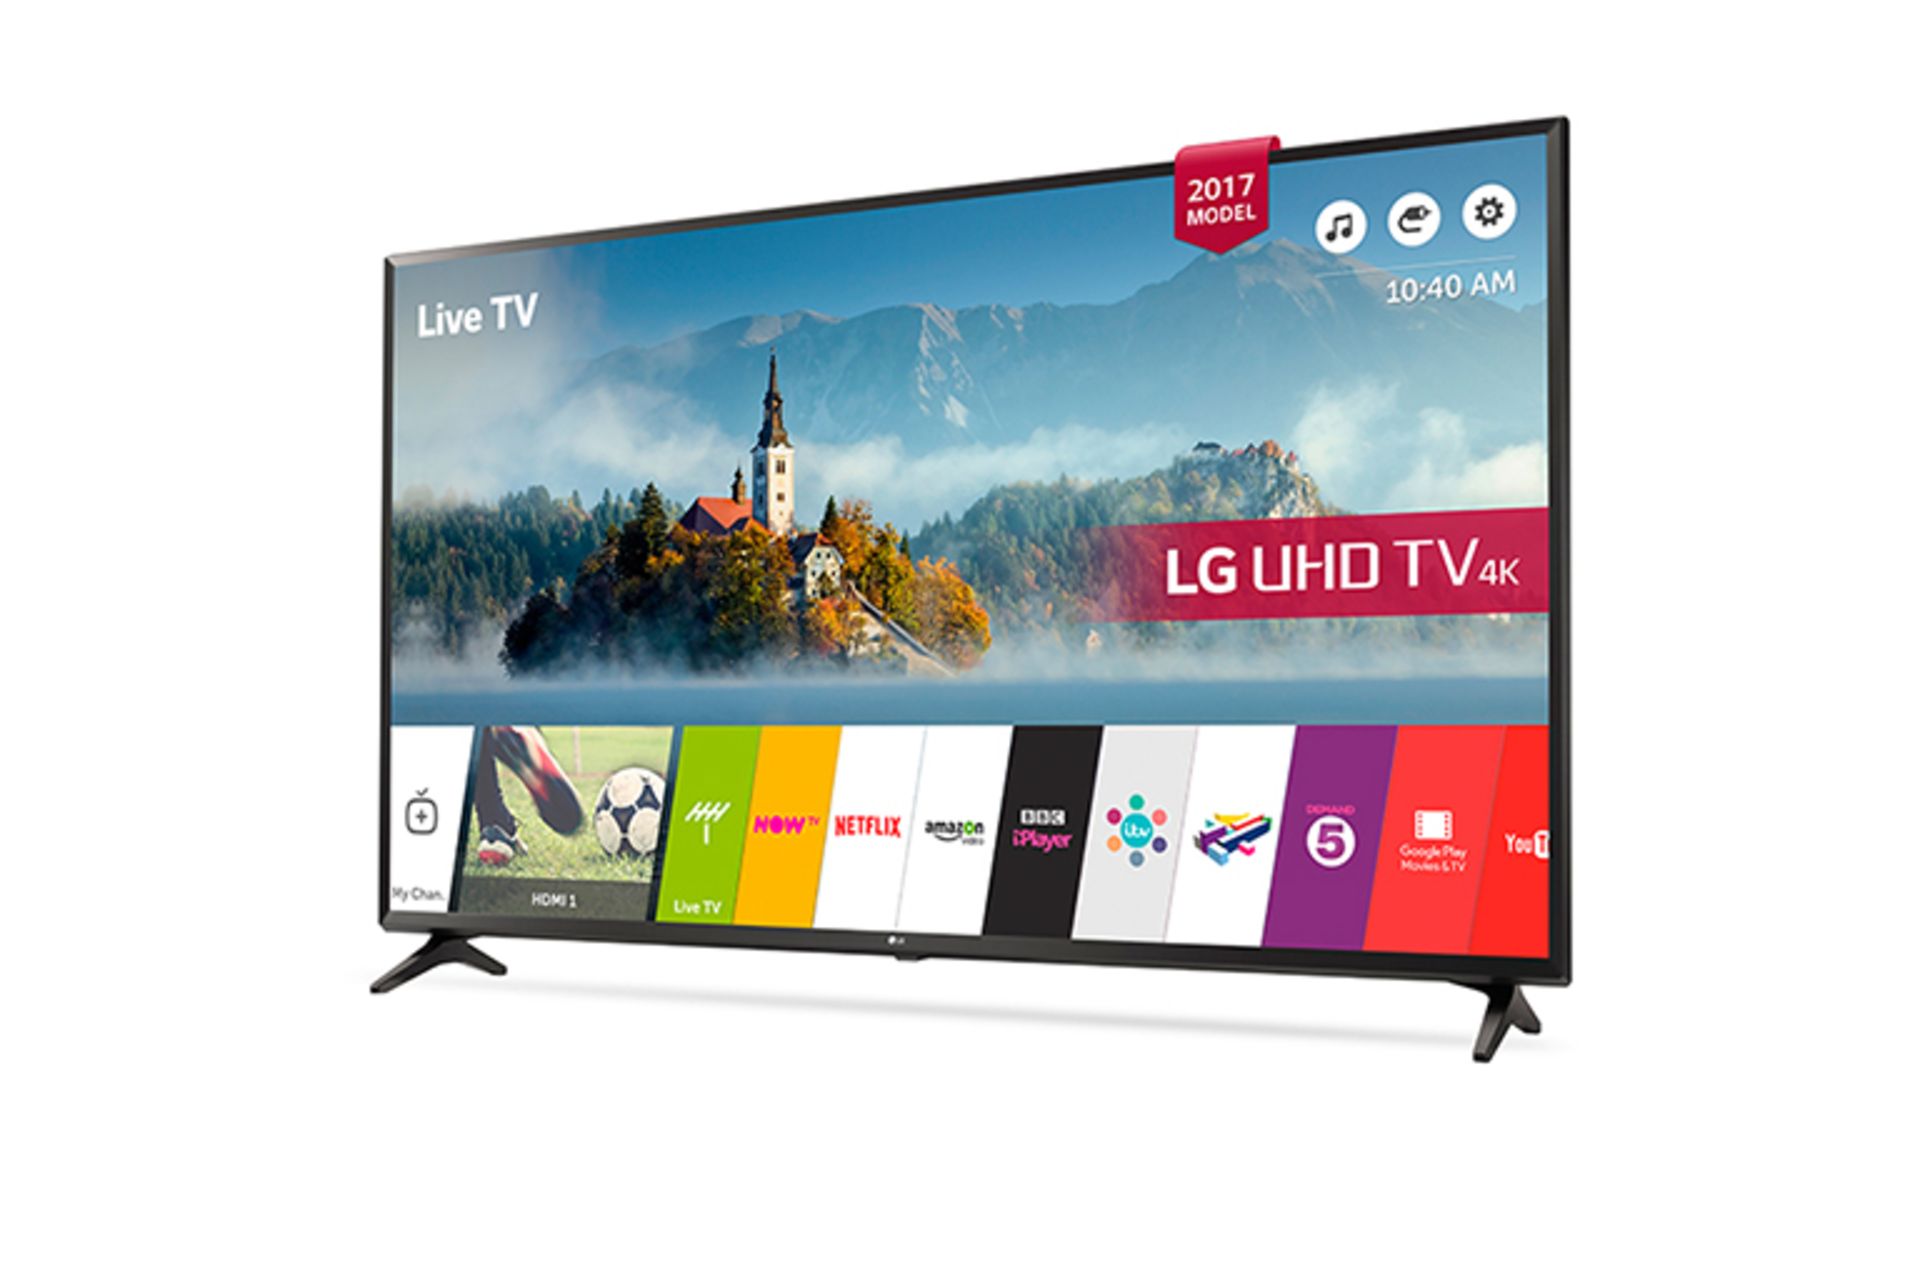 V Grade A LG 55" Widescreen Ultra HDR 4K Smart TV With WebOS - WiFi - USB - Freeview HD